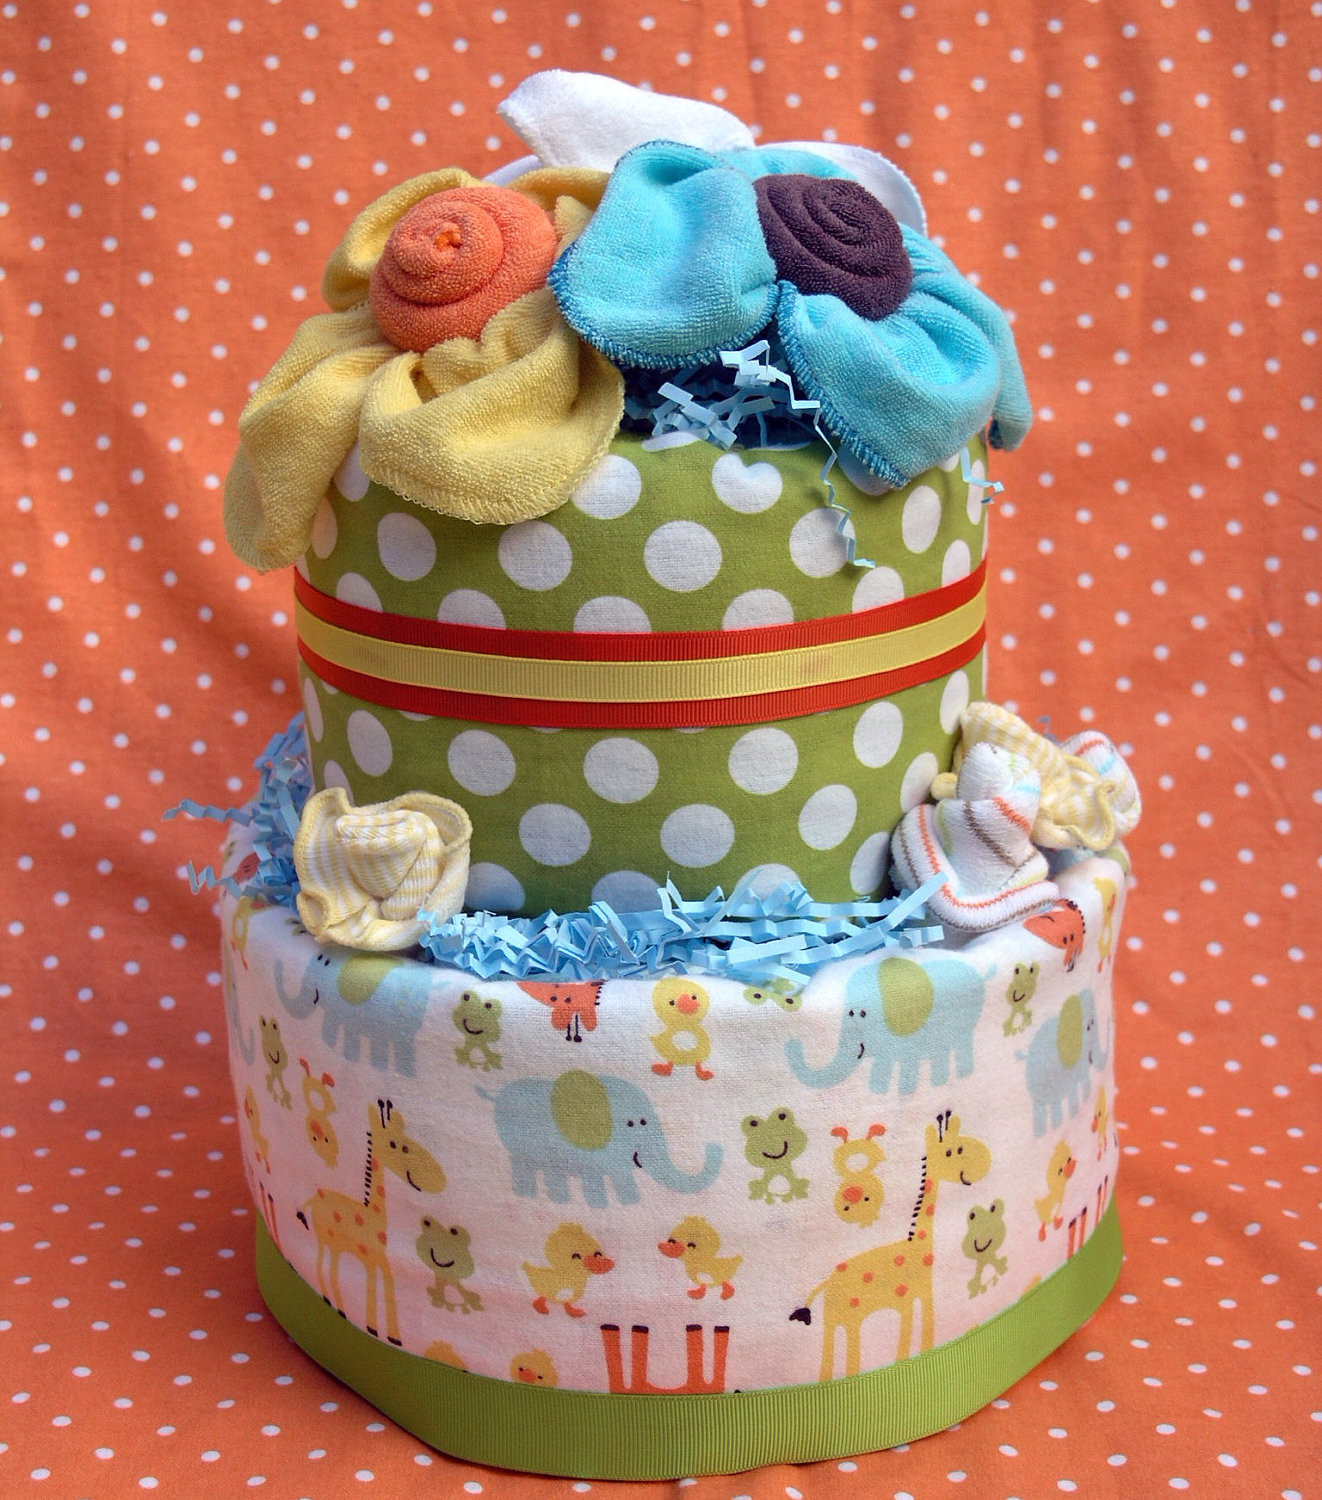 DIY Baby Shower Diaper Cakes
 DIY Diaper Cakes For Baby Showers